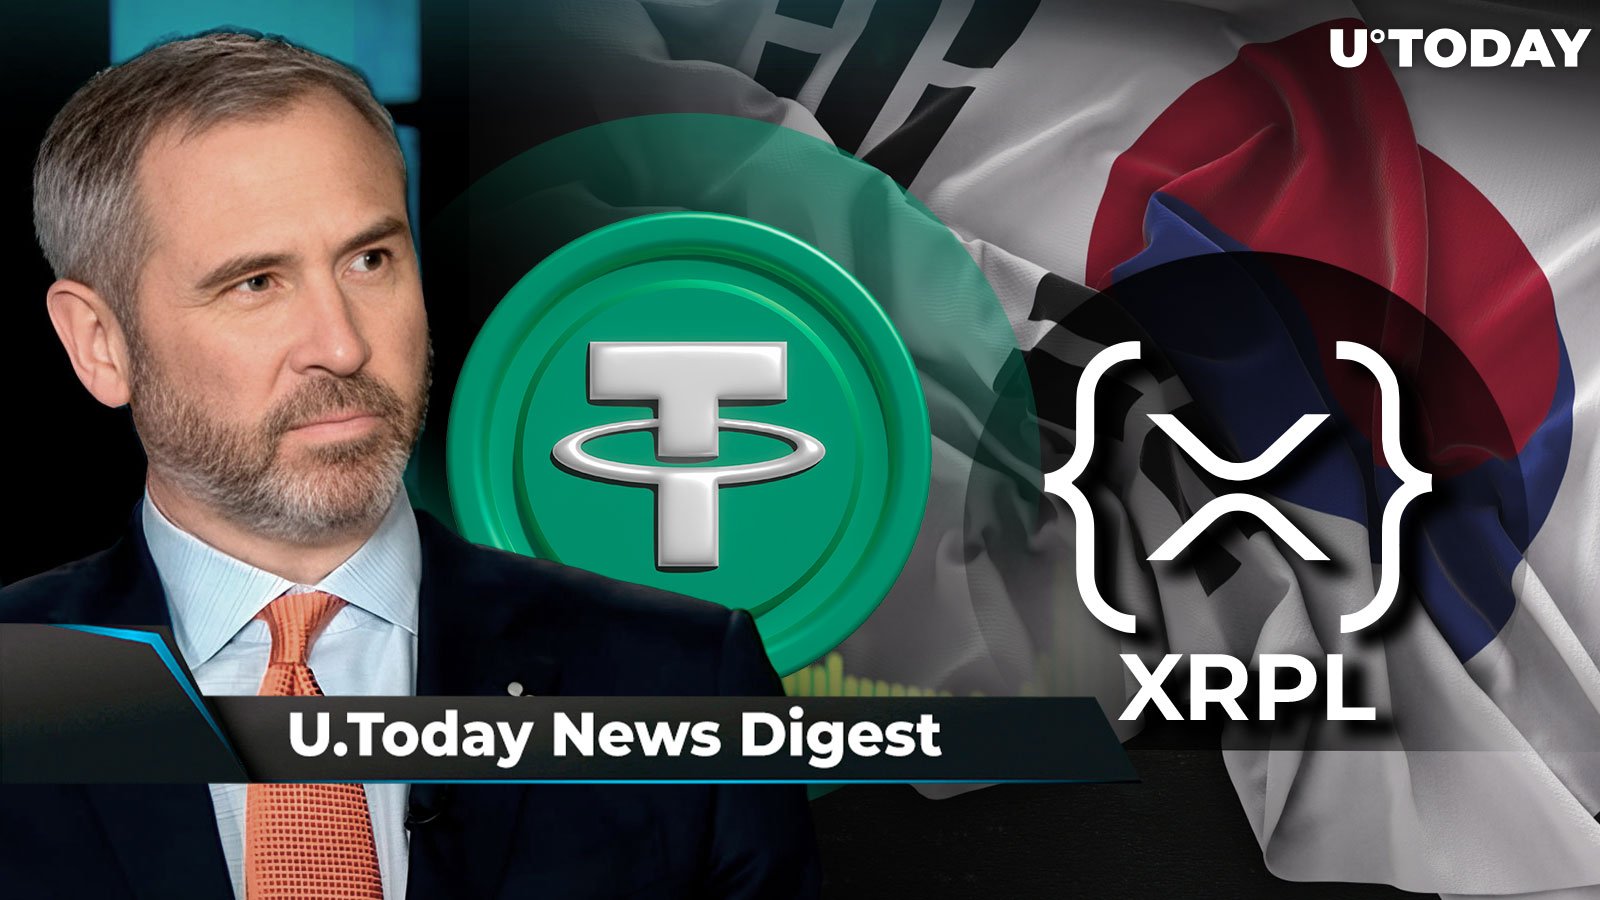 Ripple CEO denies 'attacking' Tether, XRP surges 194% in volume as key Ripple v. date arrives  SEC, XRP Ledger Get South Korean Validator: U.Today's Crypto News Digest